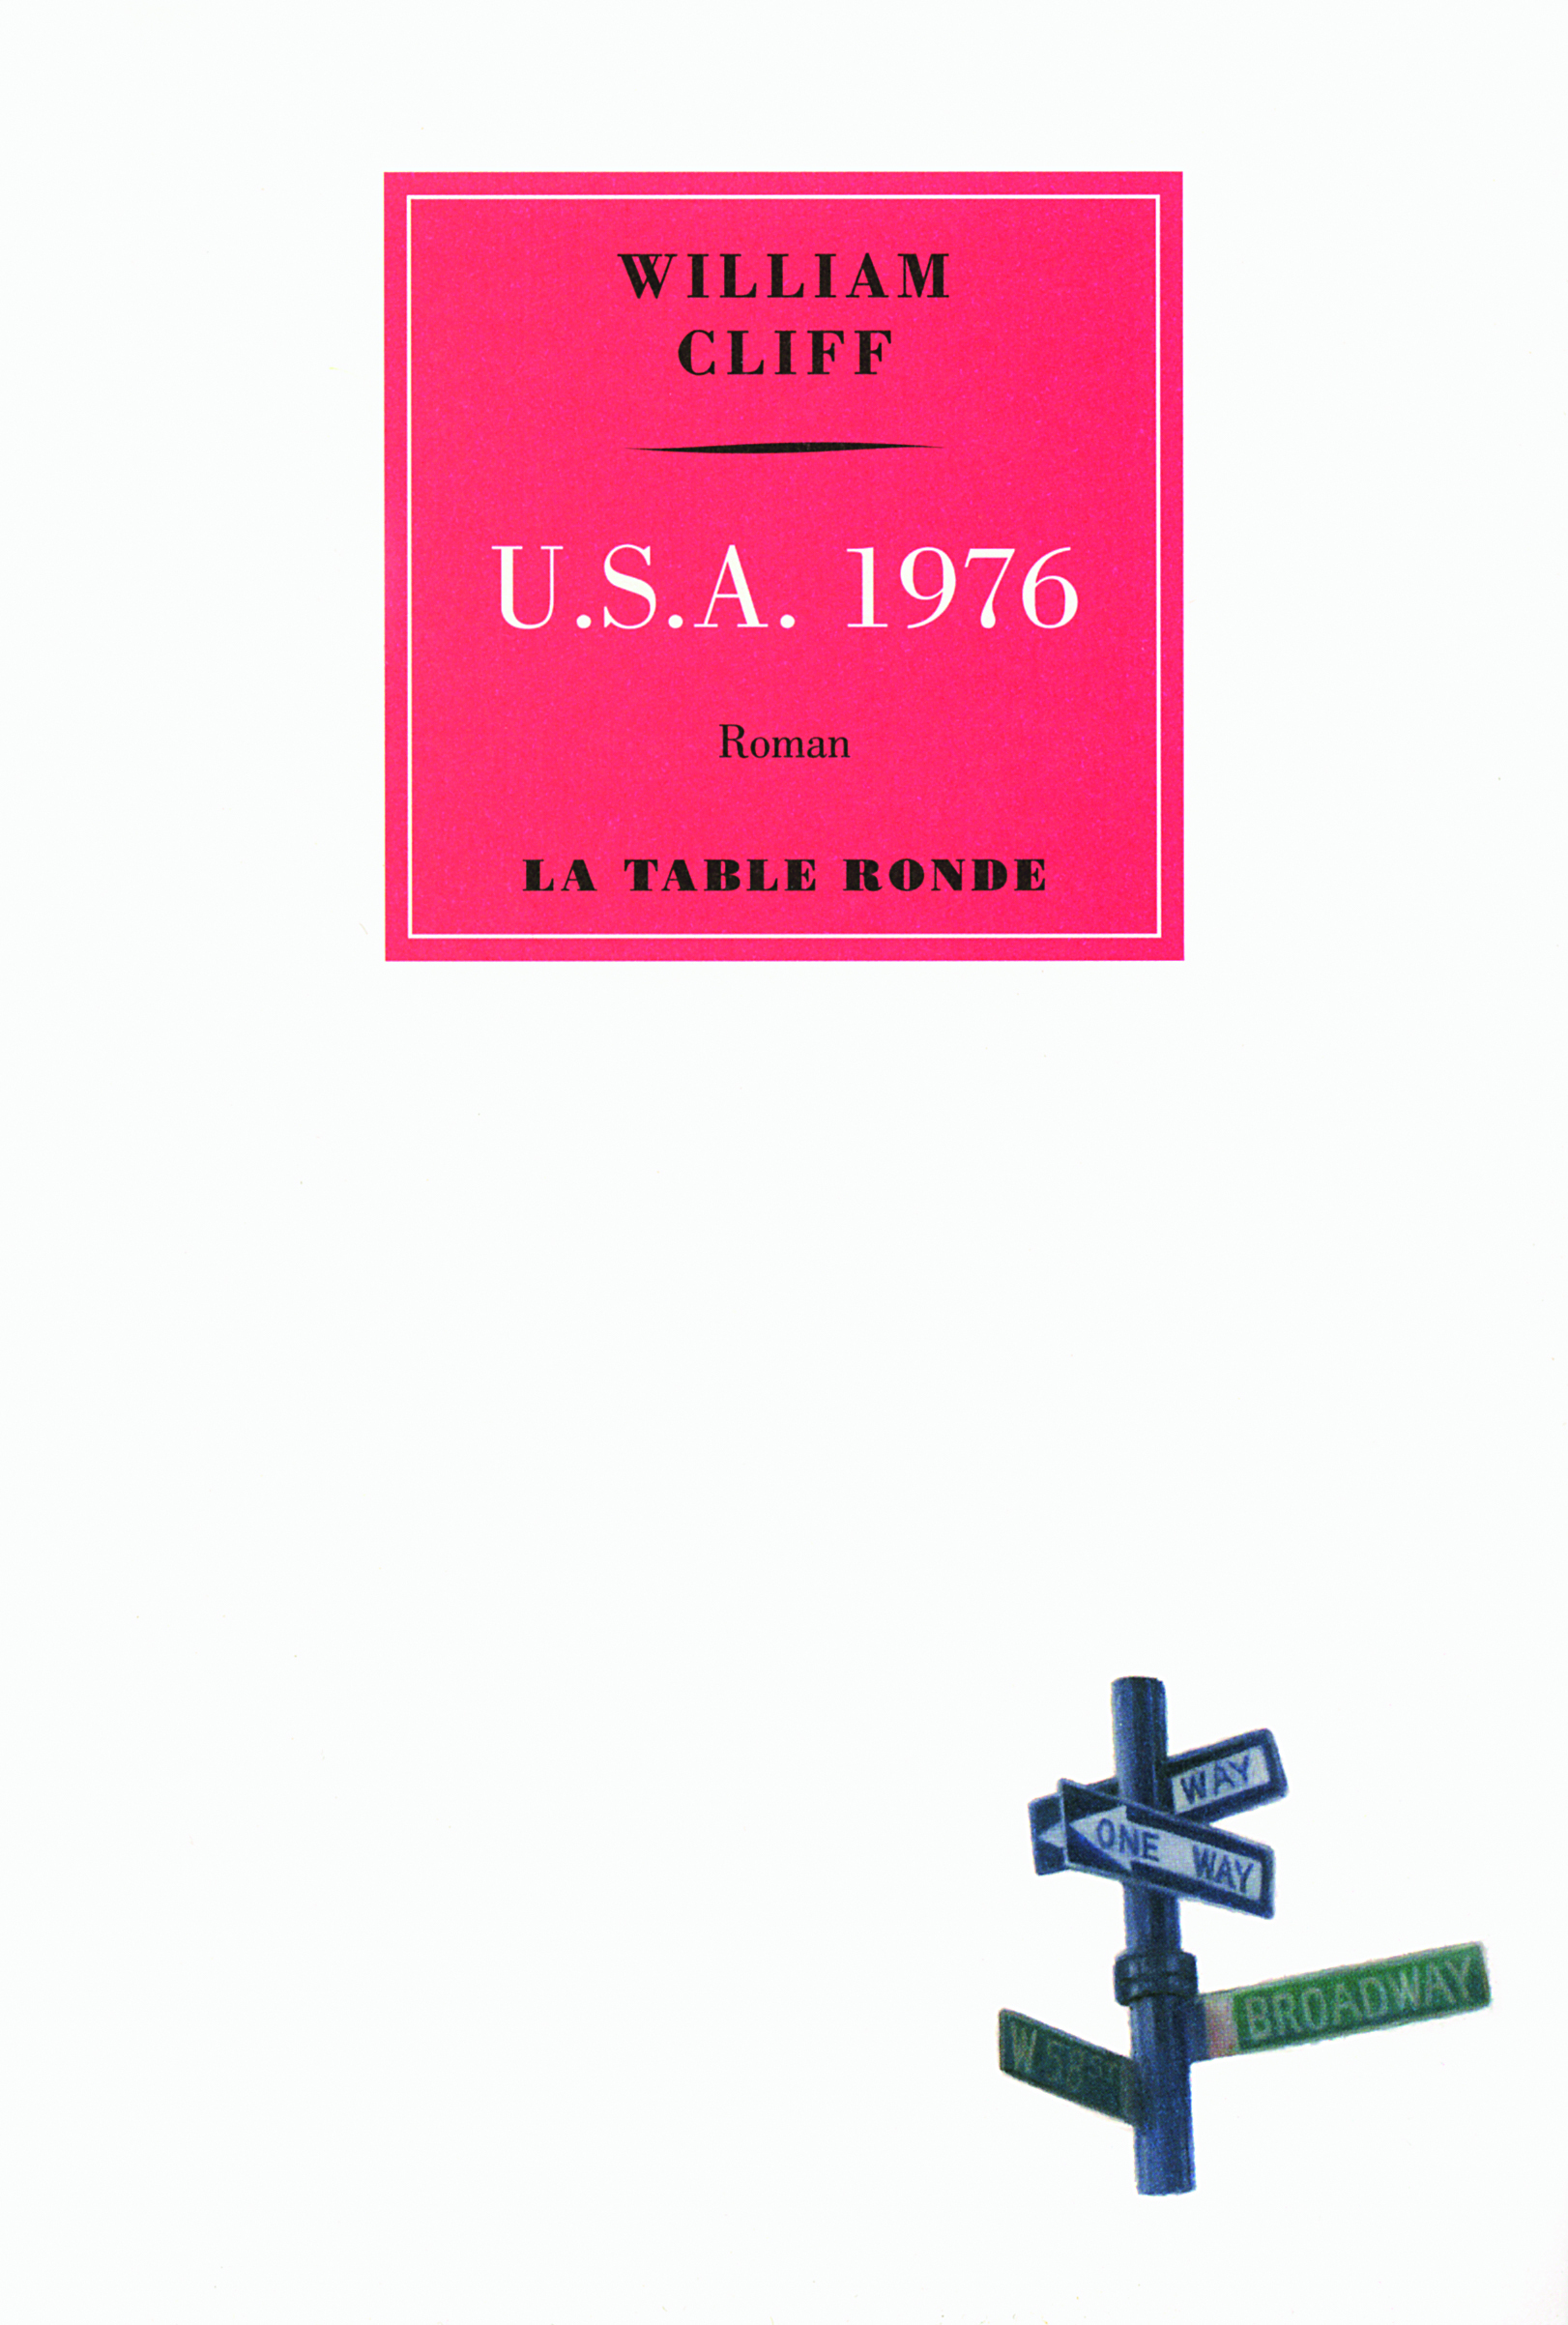 U.S.A. 1976 (9782710331544-front-cover)